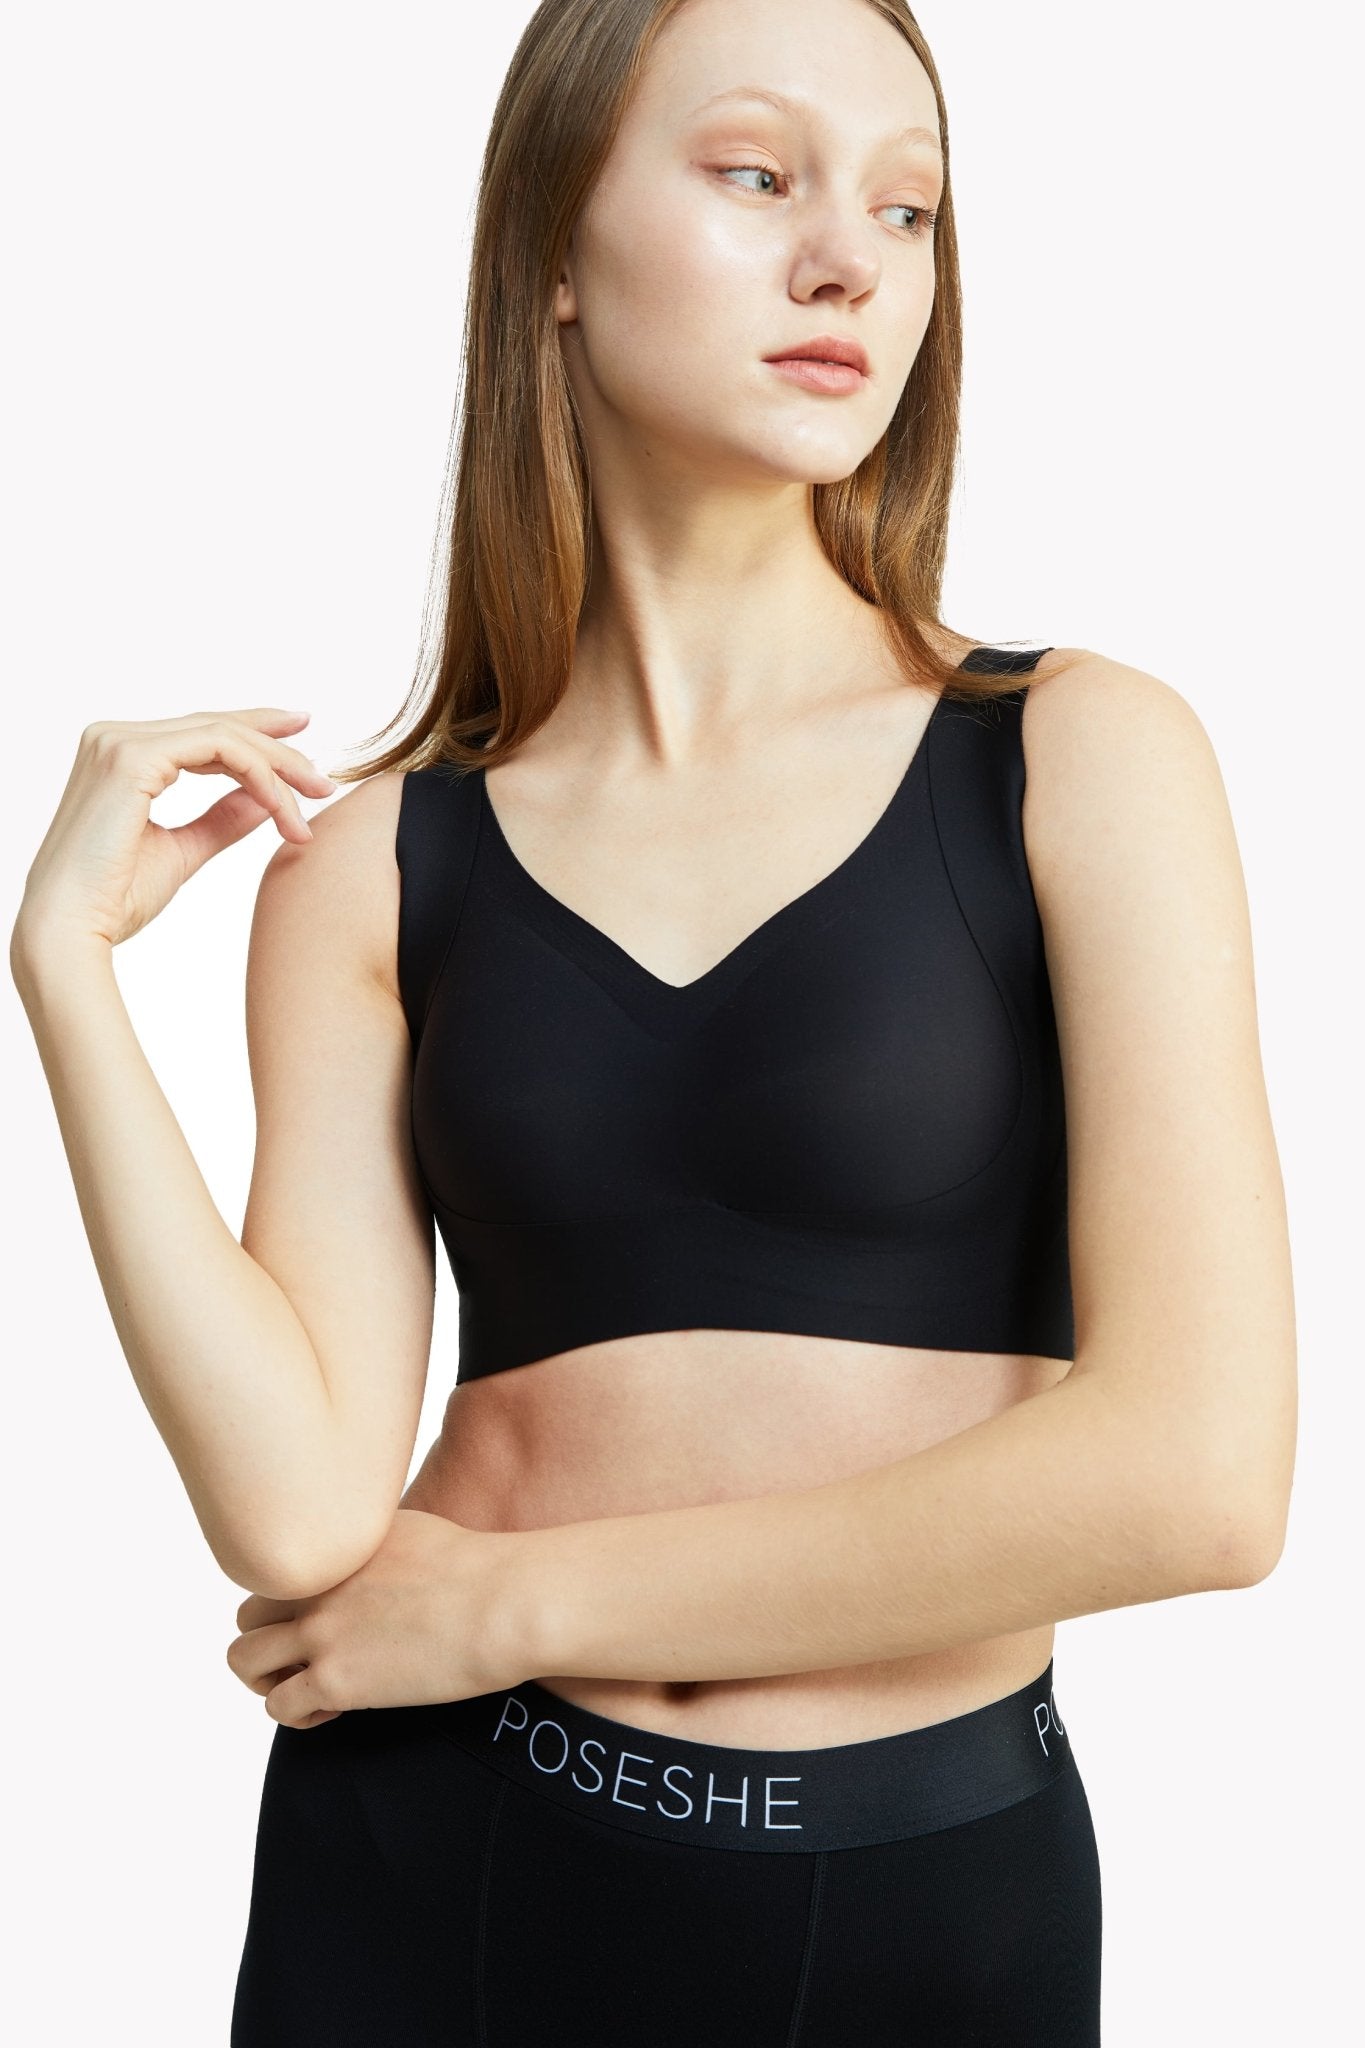 Easy Pieces™️ Ultra-Soft Seamless Girls Bra (For A-D Cup) - POSESHE